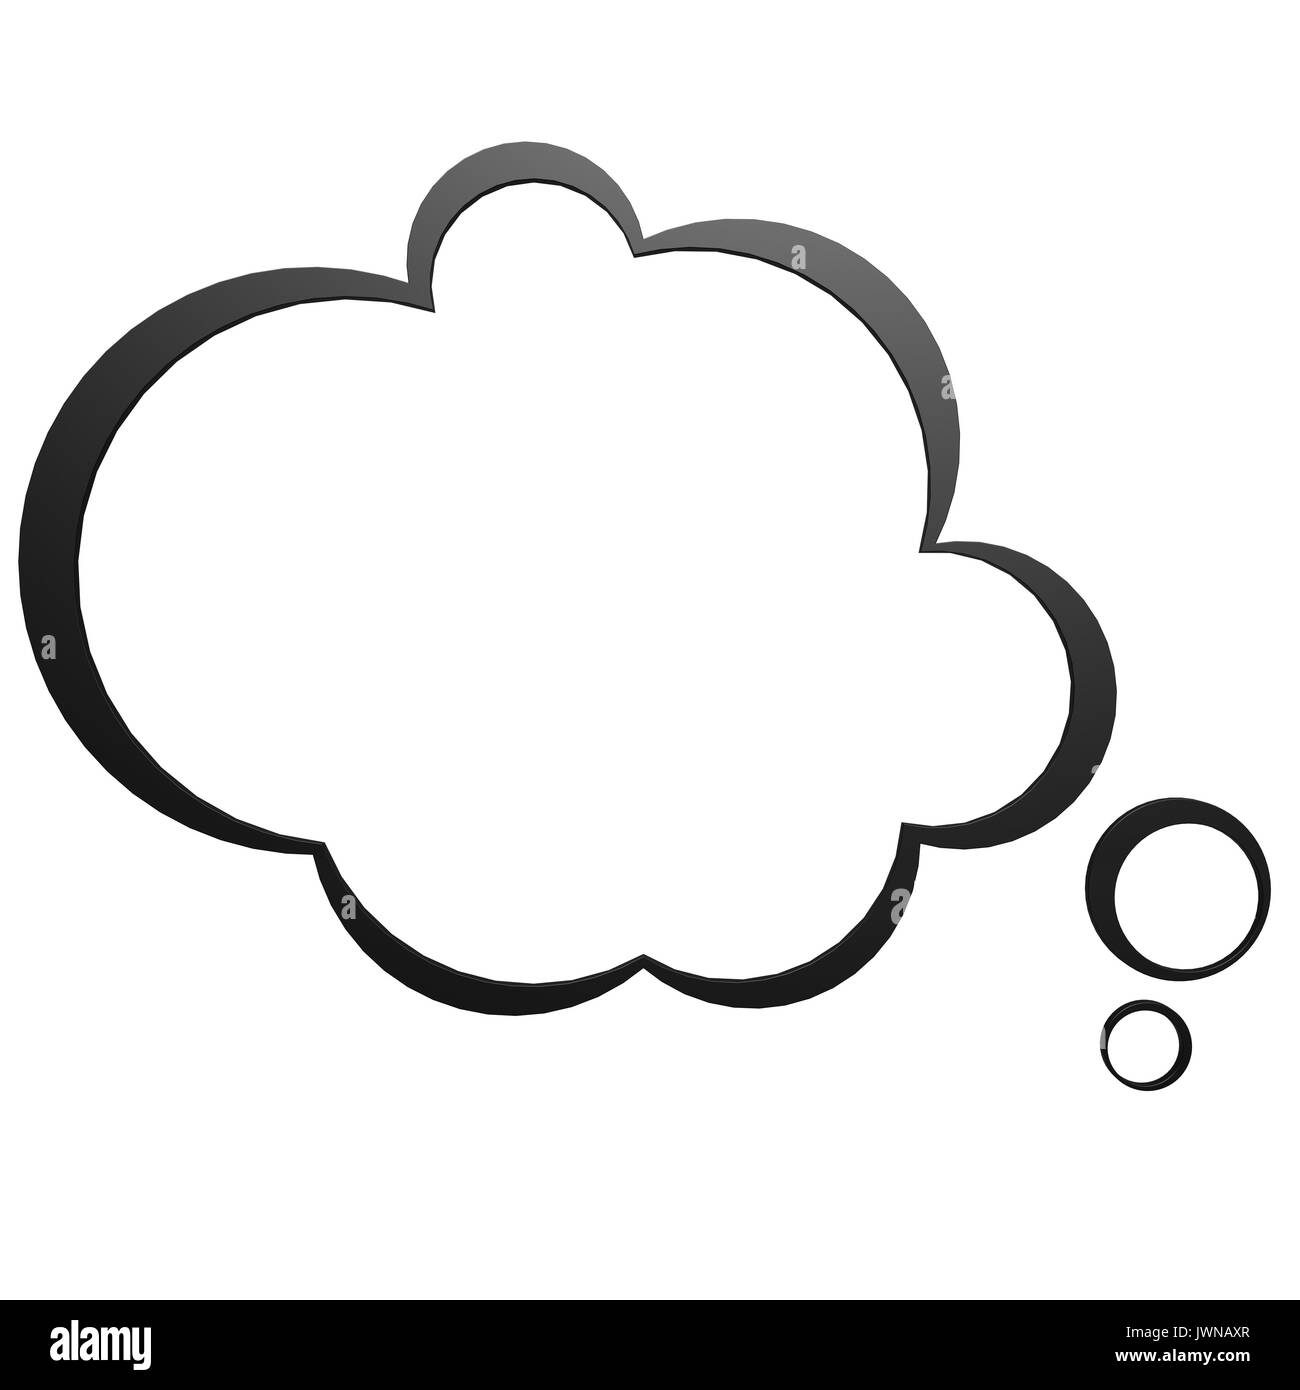 Thought bubble cartoon image with hi-res rendered artwork that could be used for any graphic design. Stock Photo